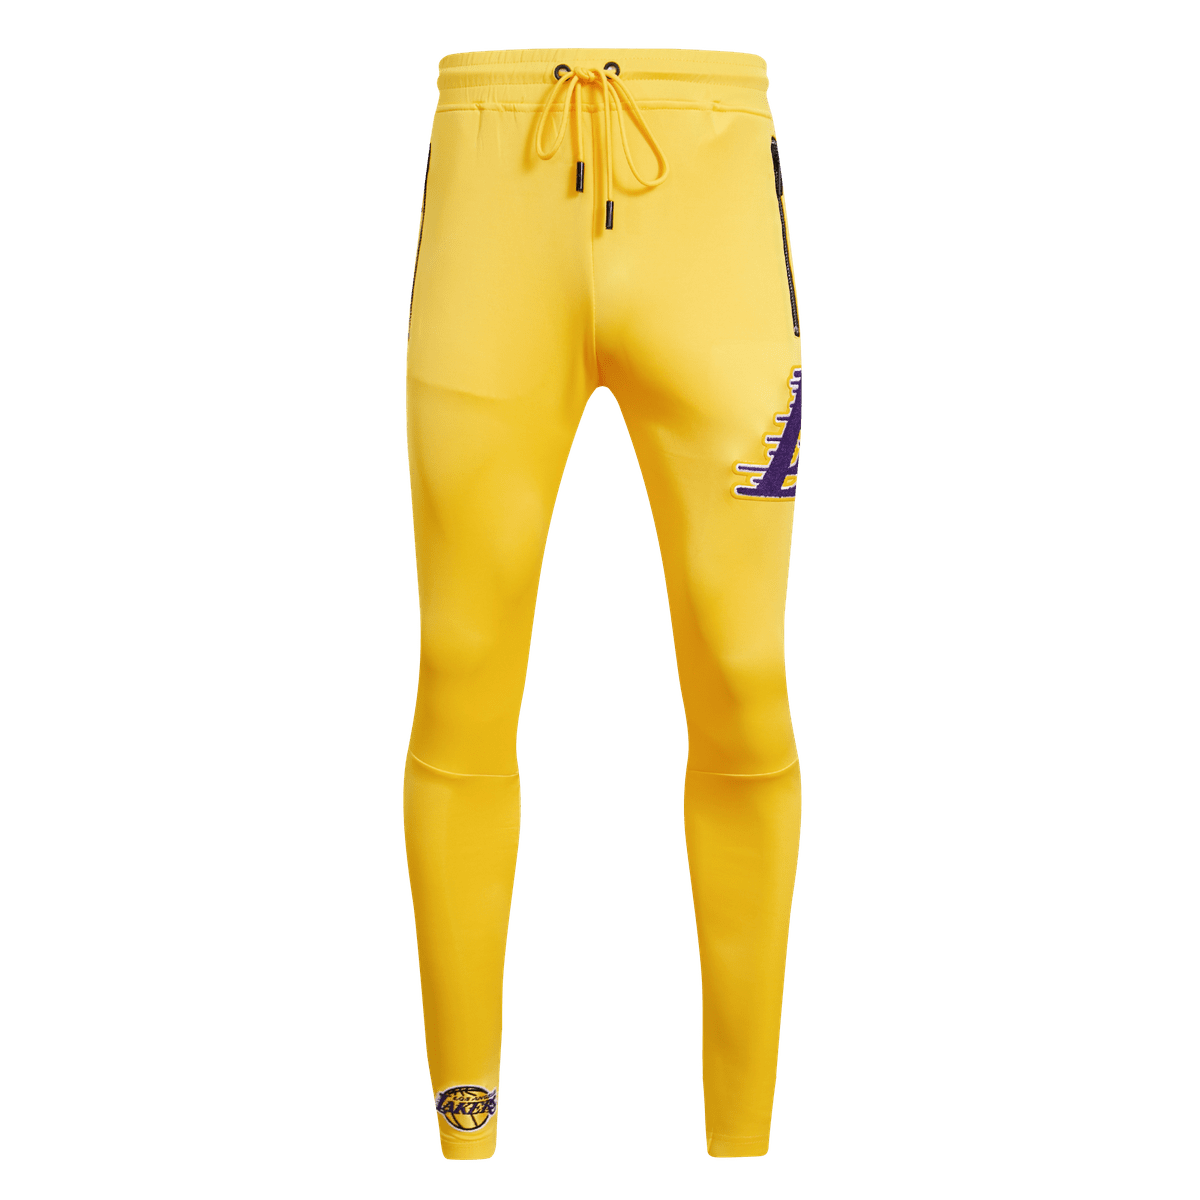 LOS ANGELES LAKERS CLASSIC DK TRACK PANT (YELLOW) – Pro Standard